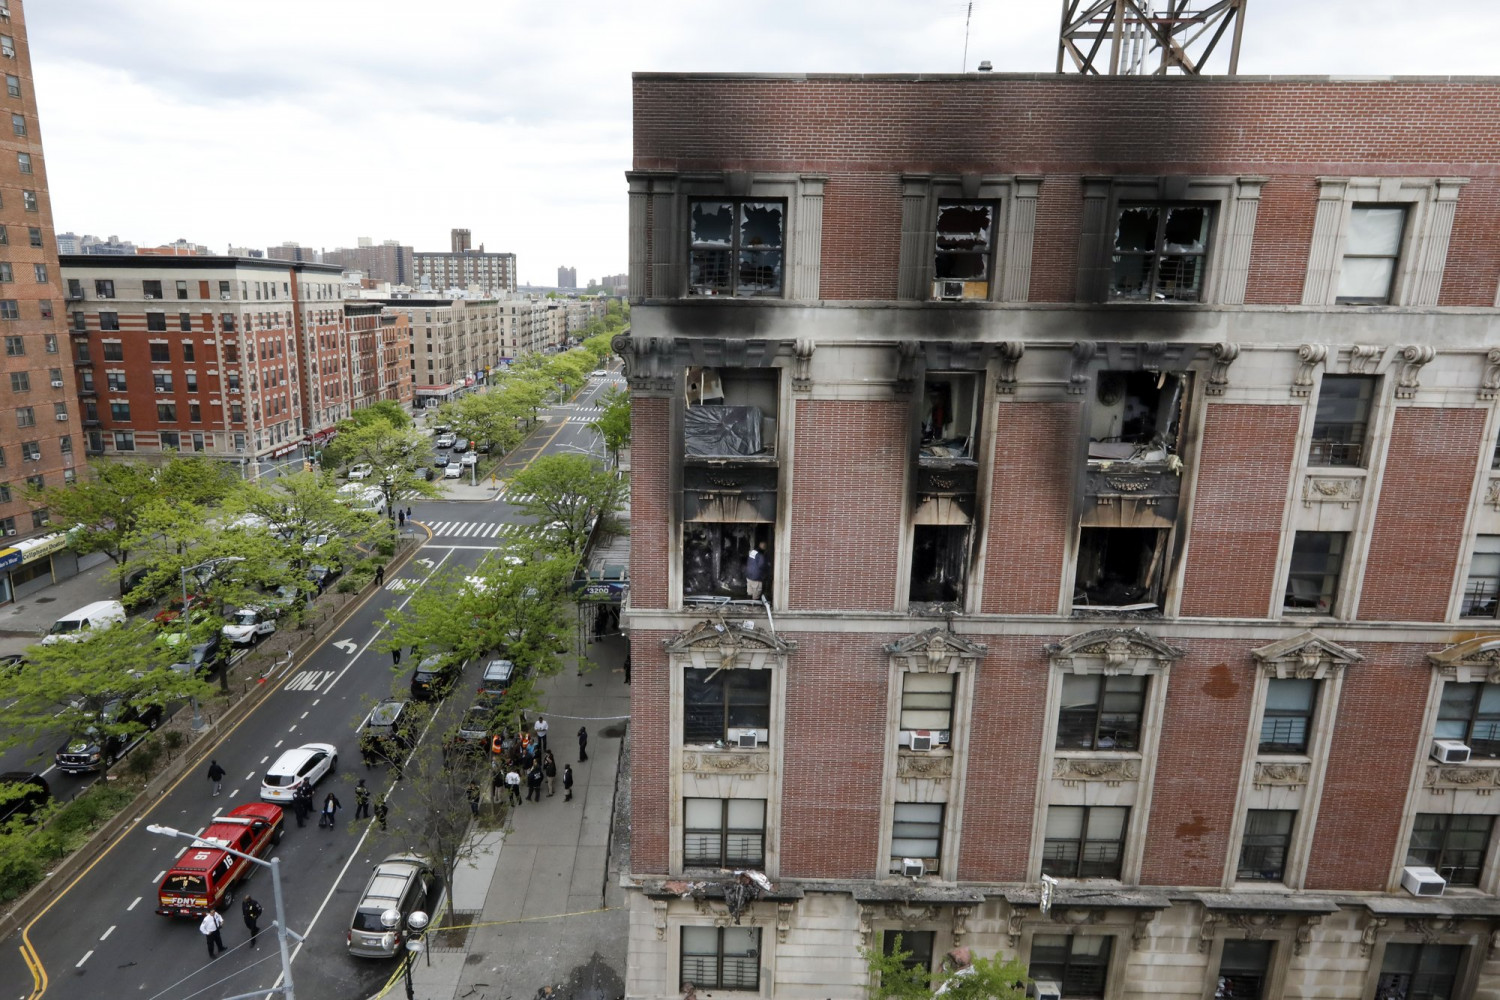 Harlem apartment fire claims 6 lives, including 4 children